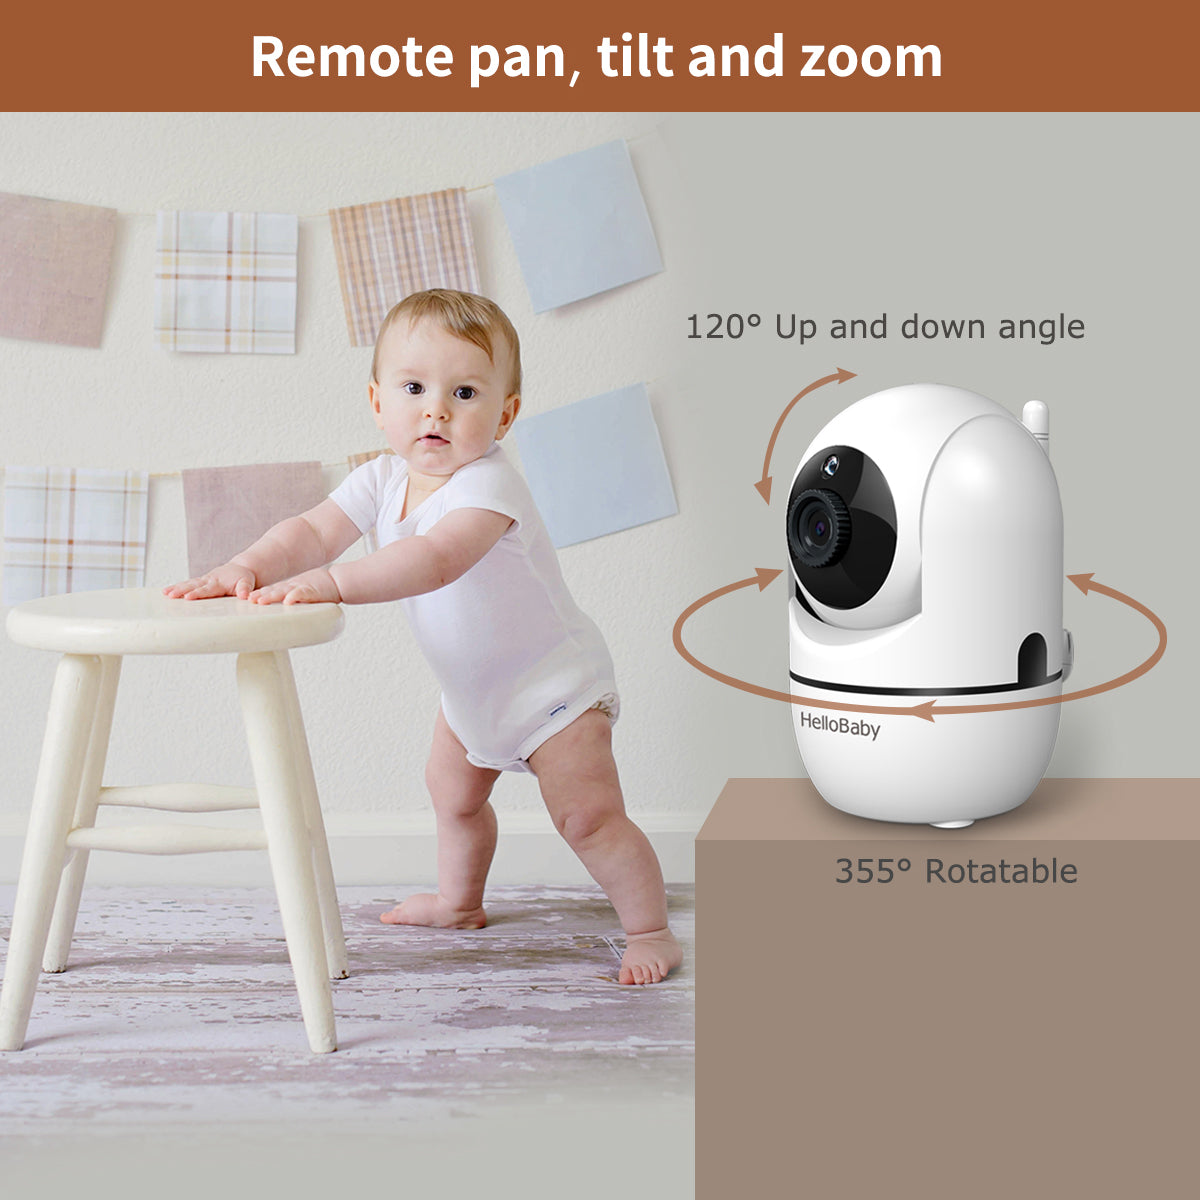 HelloBaby monitor HB65  Video Baby Monitor with Camera